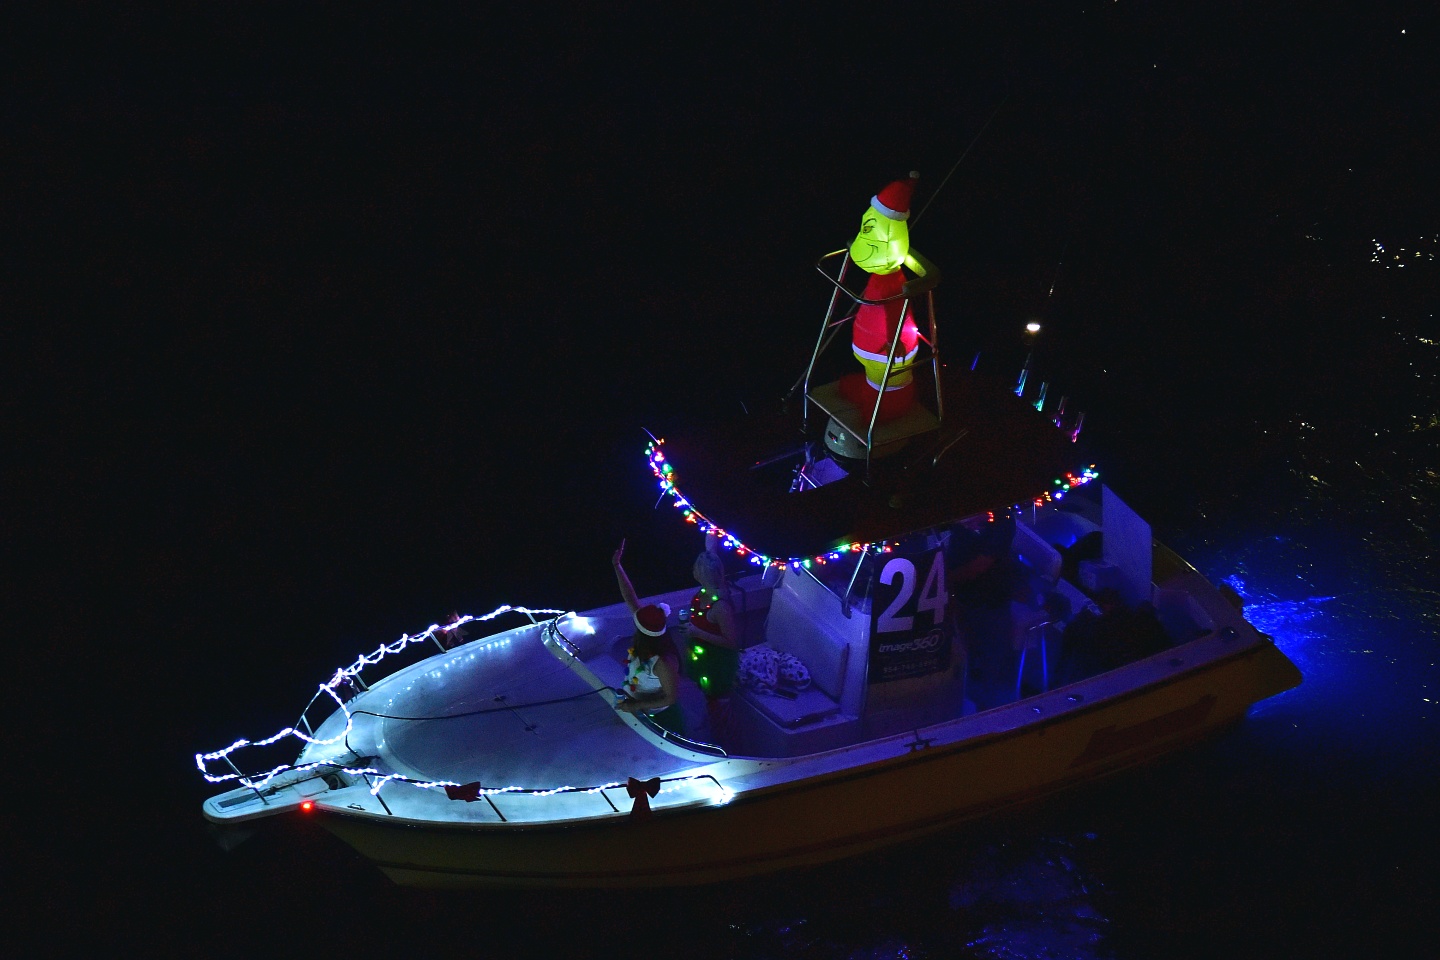 The Rock, boat number 24 in the 2021 Winterfest Boat Parade